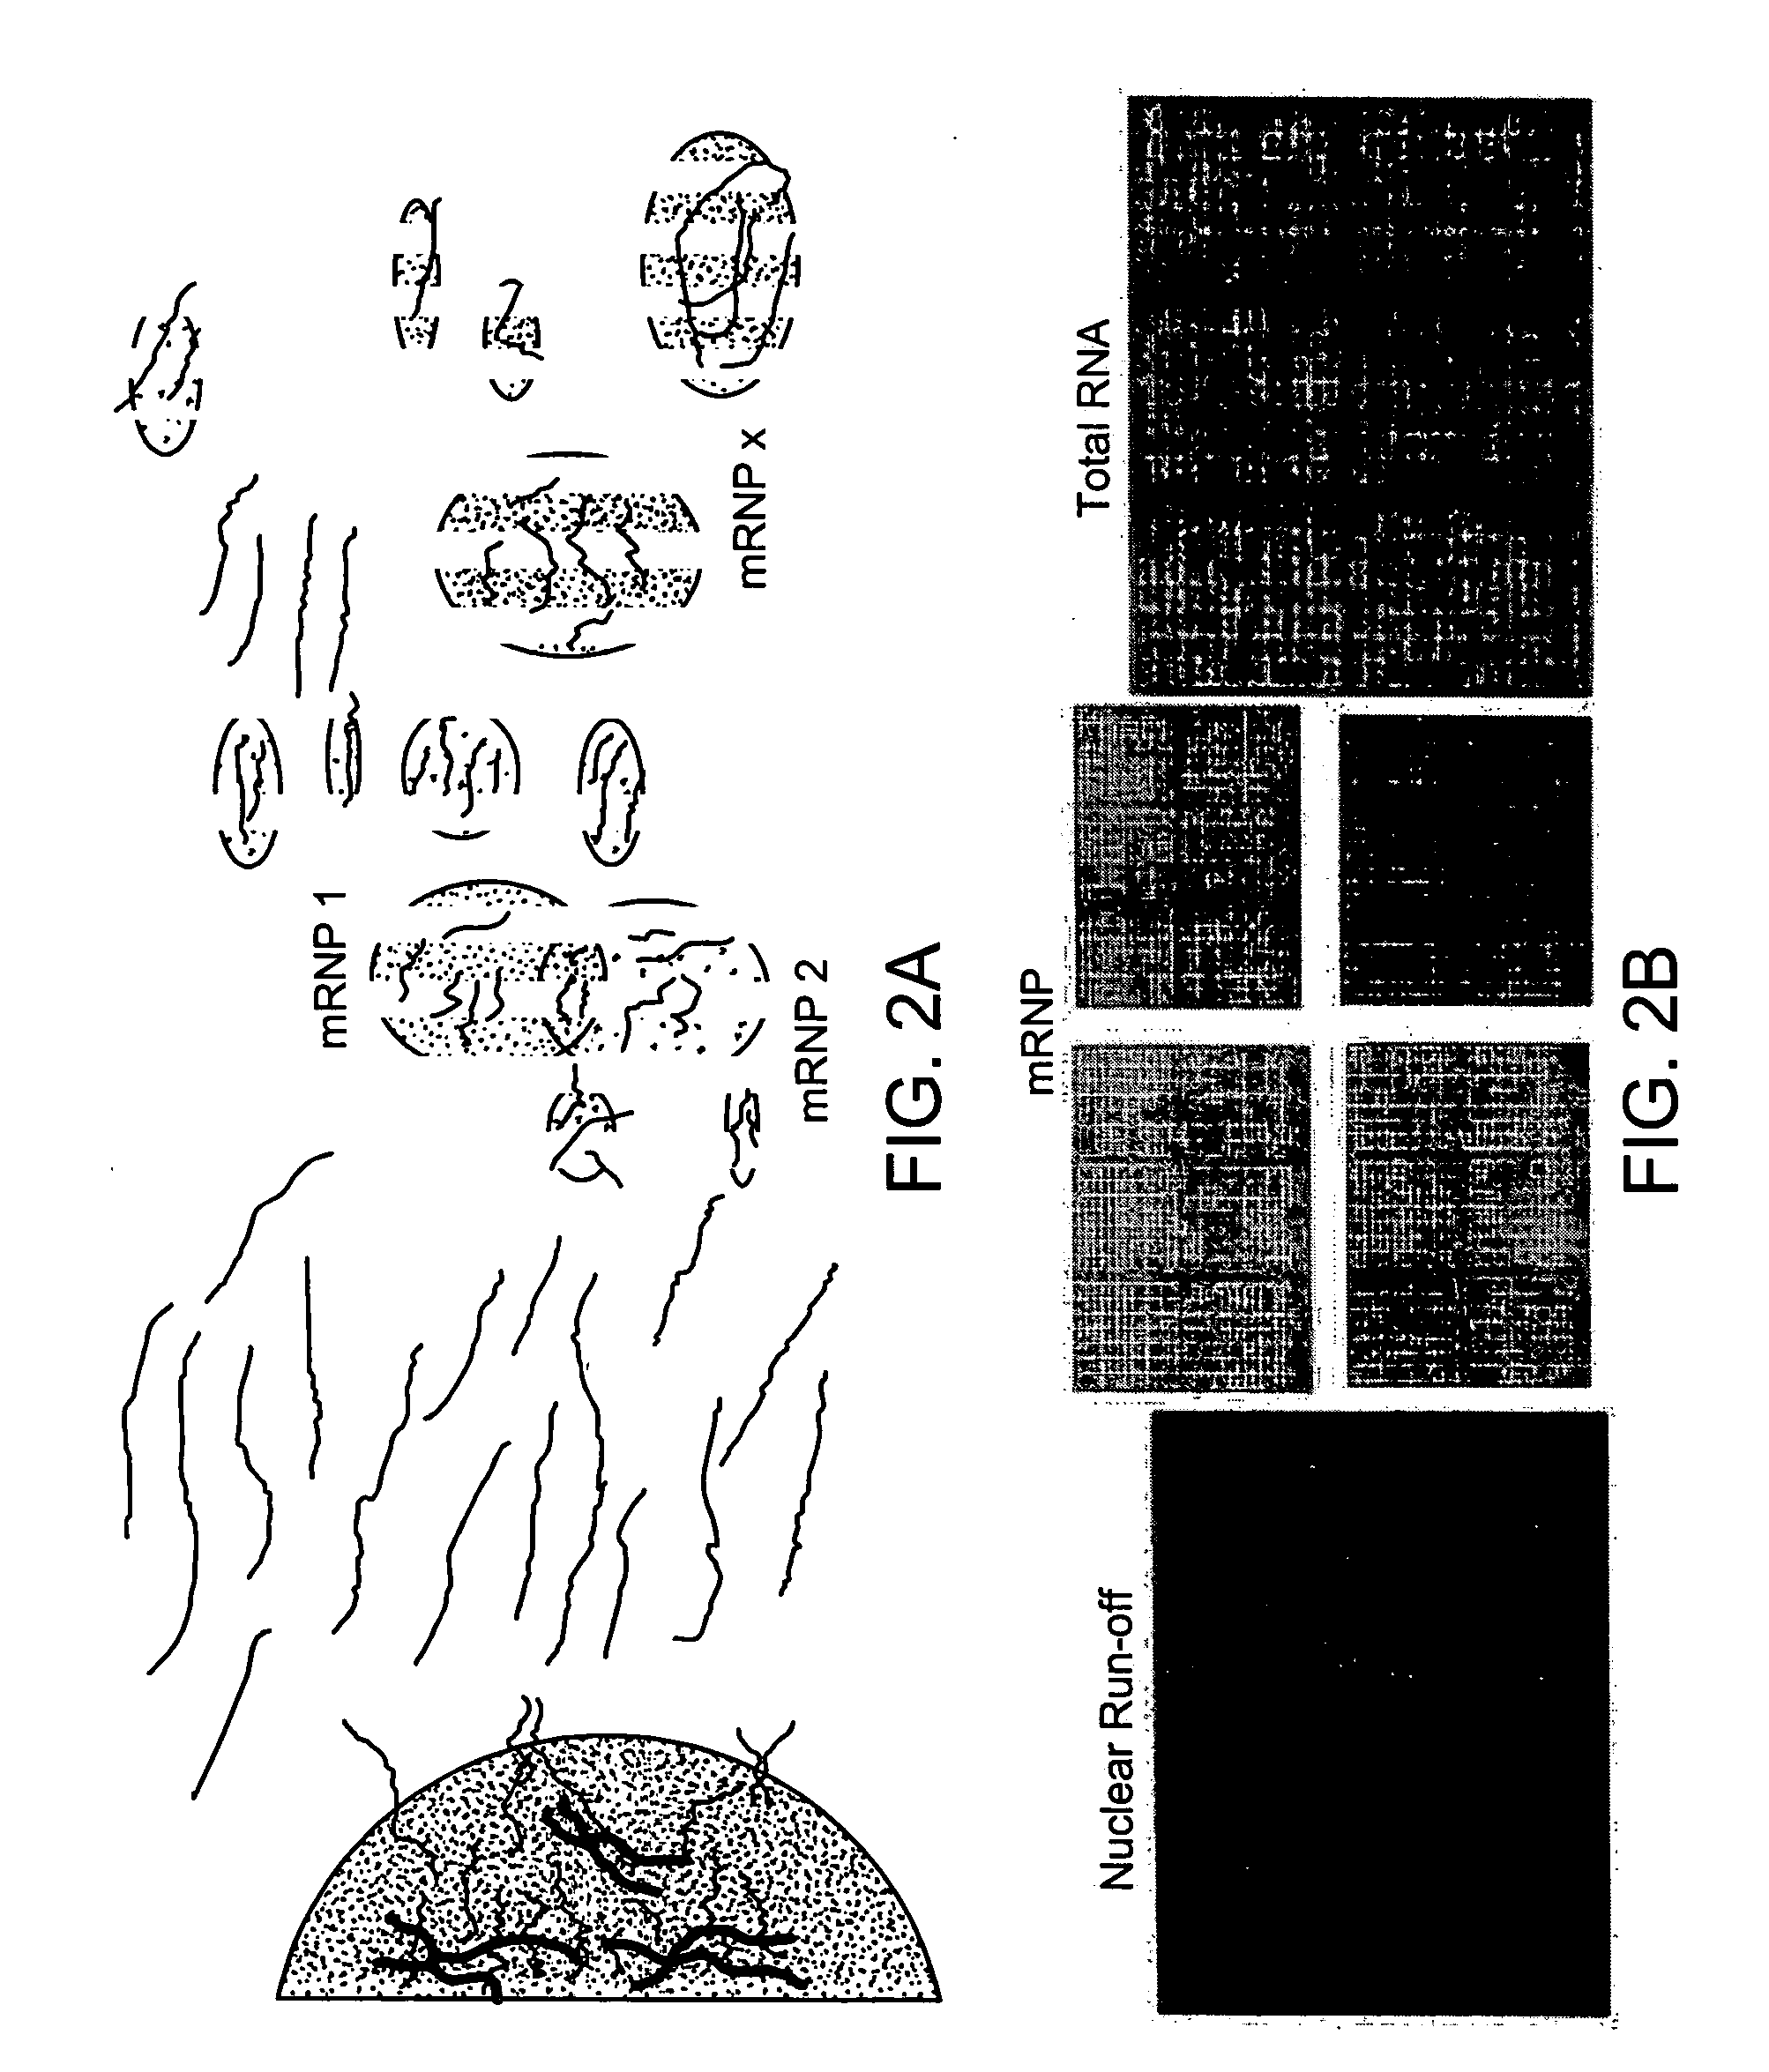 Methods for identifying functionally related genes and drug targets